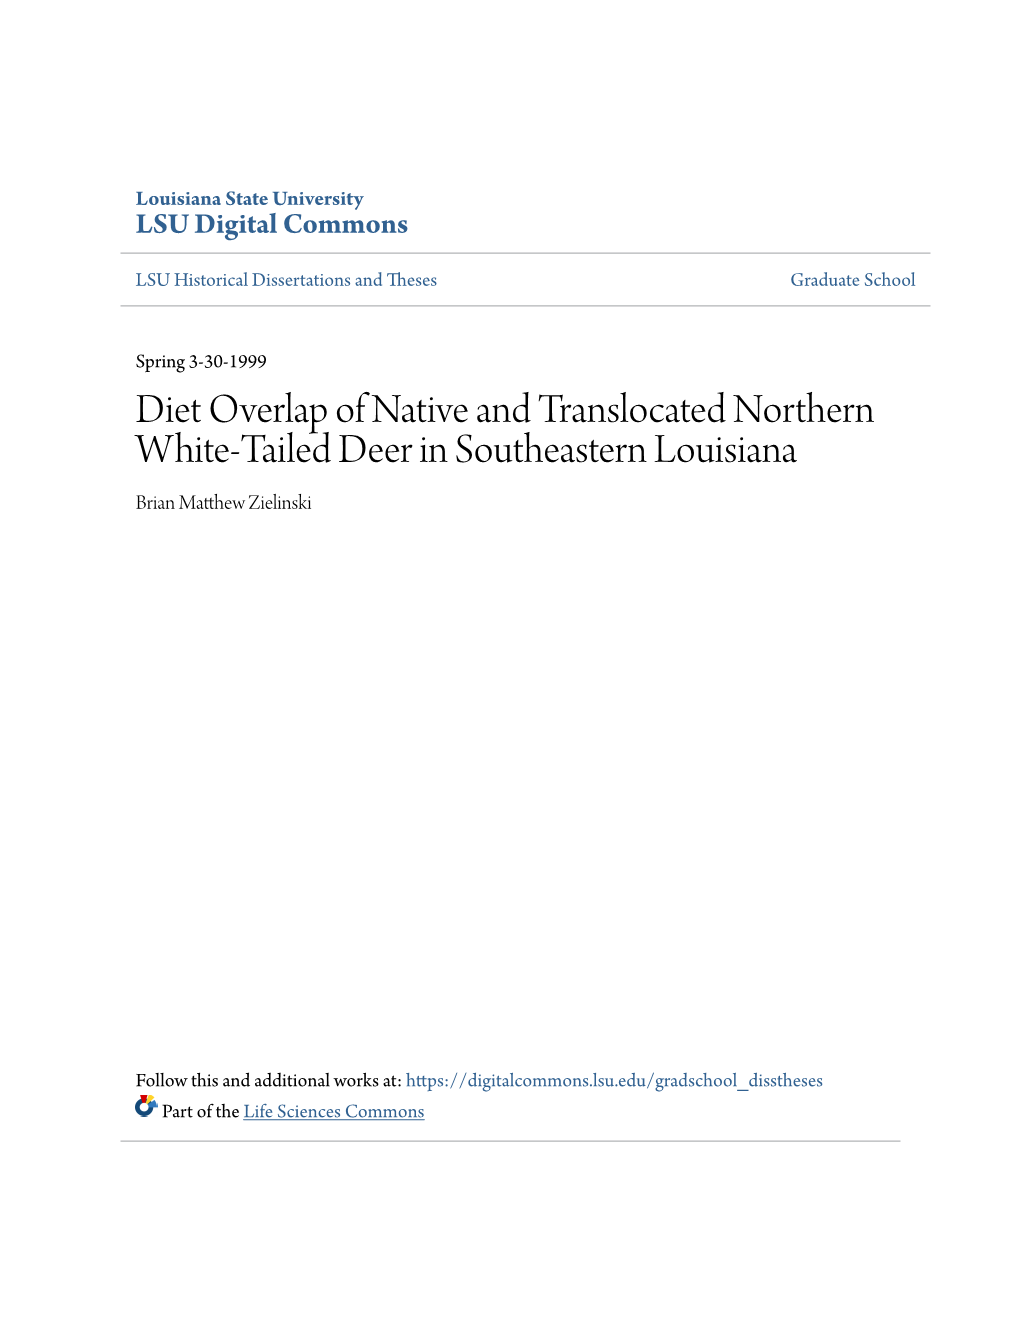 Diet Overlap of Native and Translocated Northern White-Tailed Deer in Southeastern Louisiana Brian Matthew Zielinski